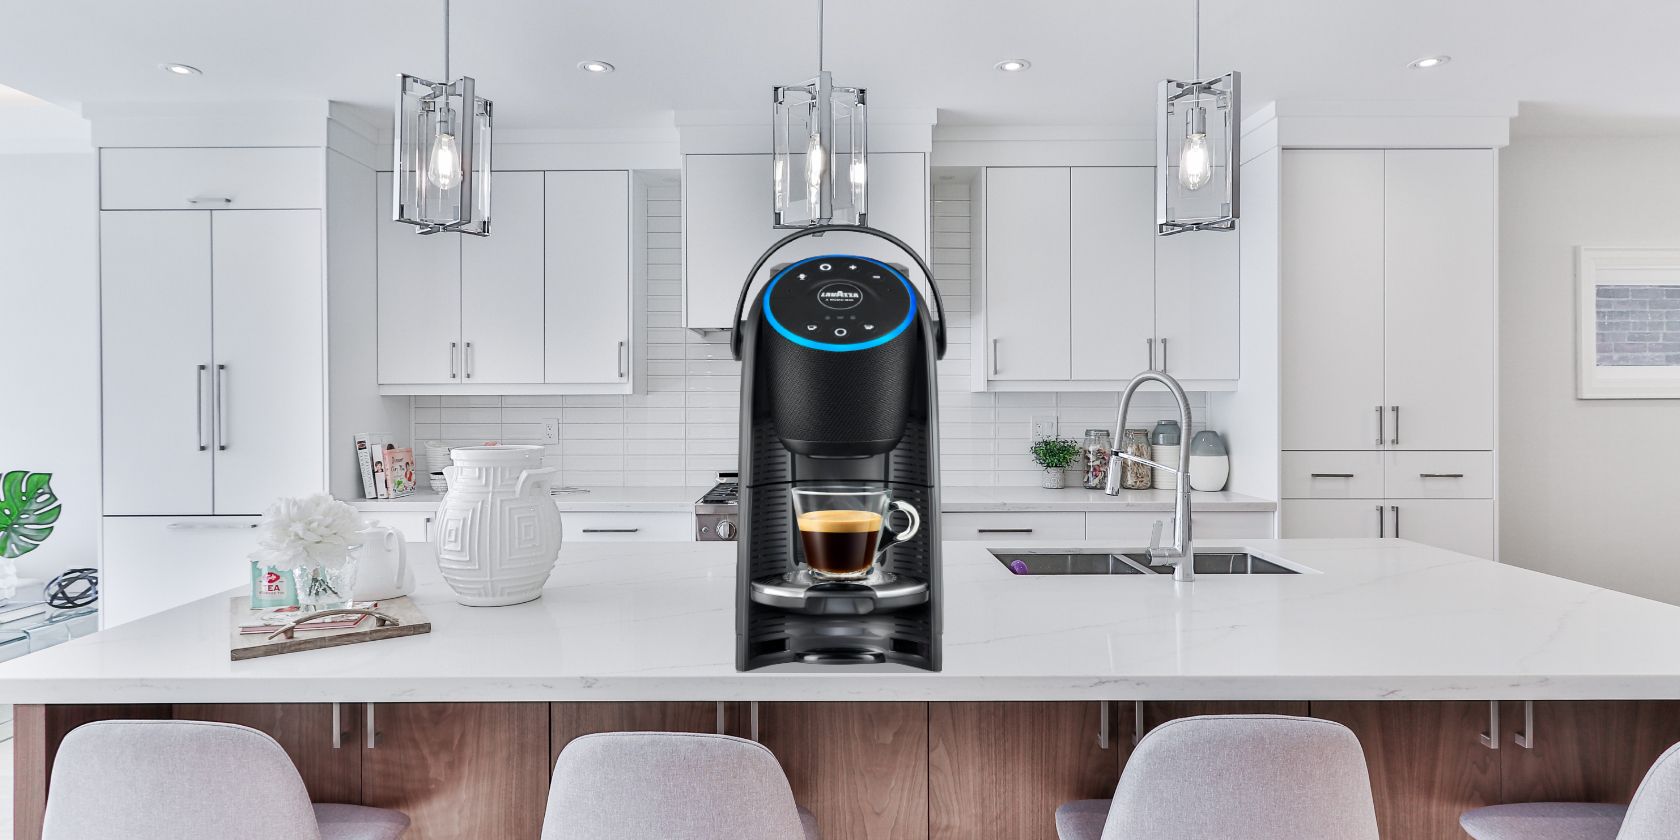 Lavazza Voicy review: we tried the Alexa-enabled smart coffee machine